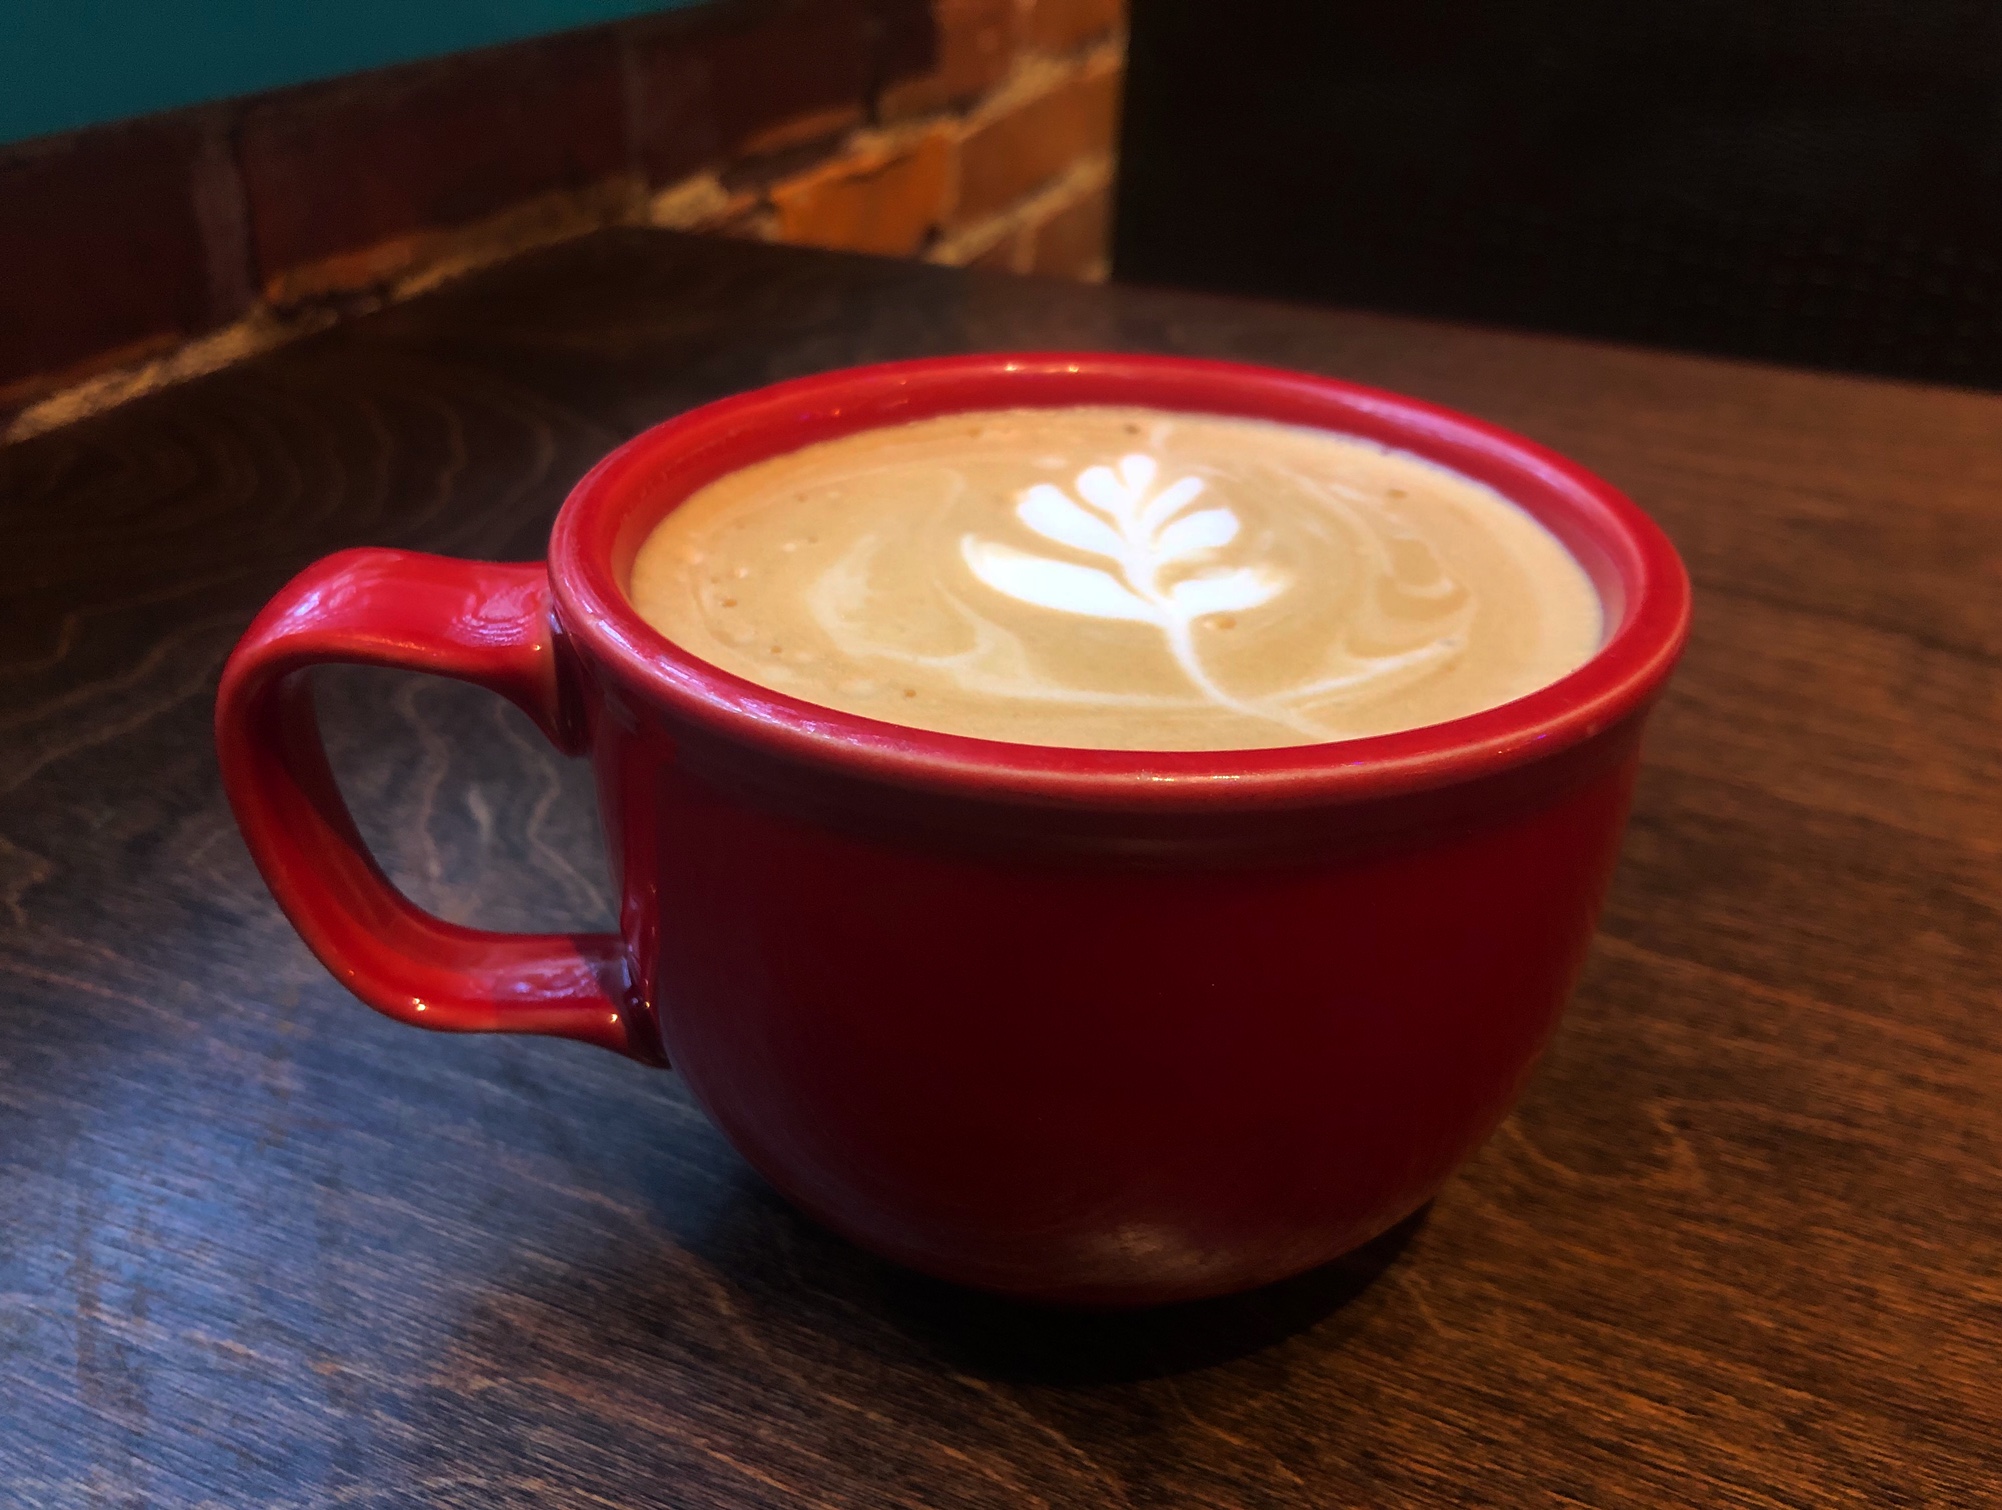 On a brown table, there is a red mug filled with coffee and a pretty latte art. Photo by Alyssa Buckley.